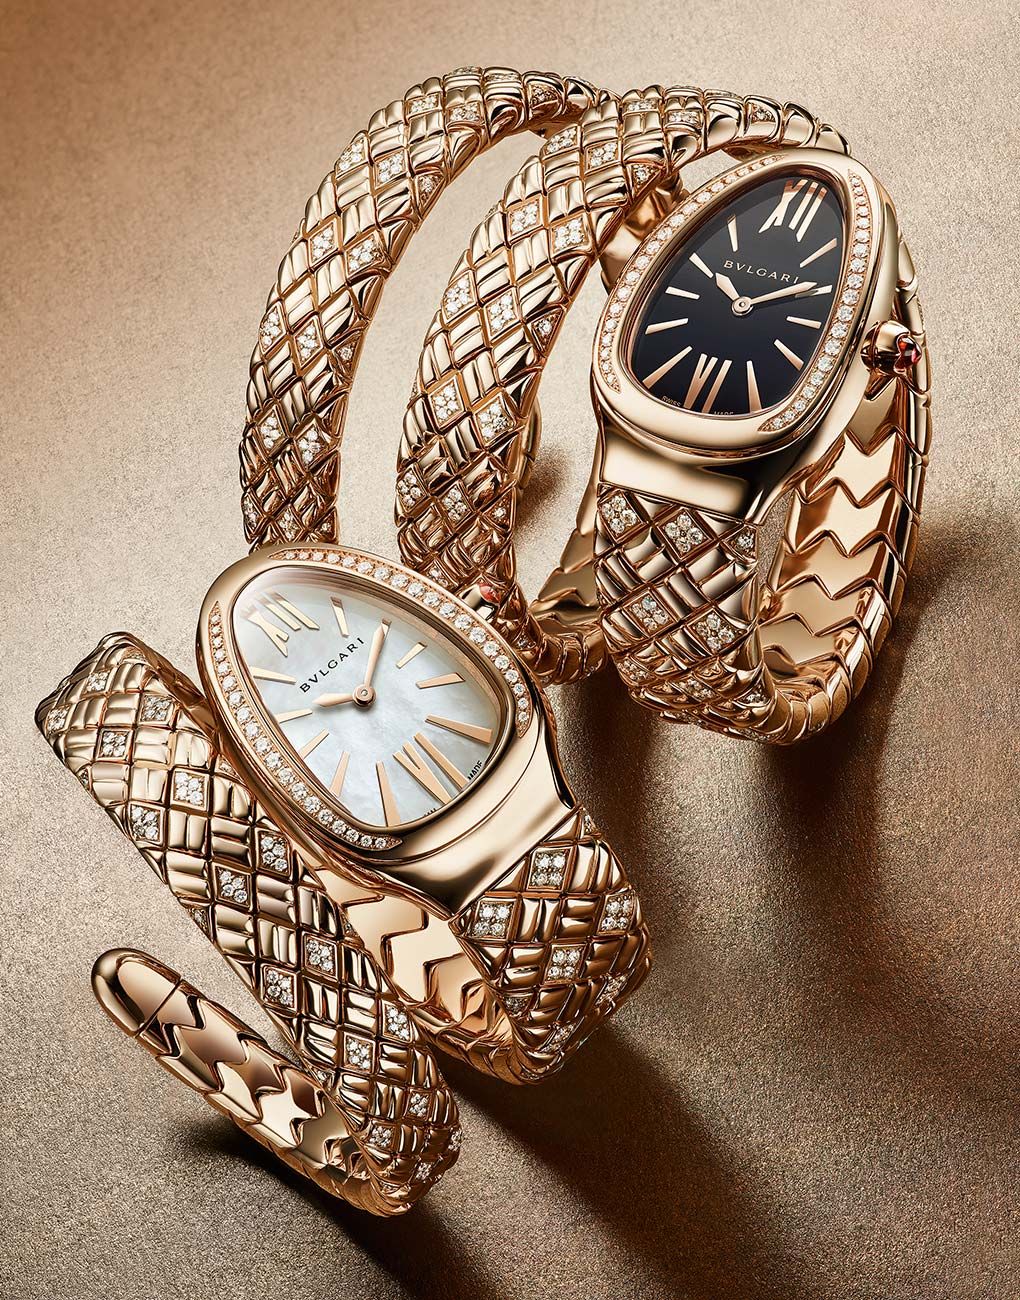 What Is The Bulgari Serpenti Collection And How Much Does It Cost?